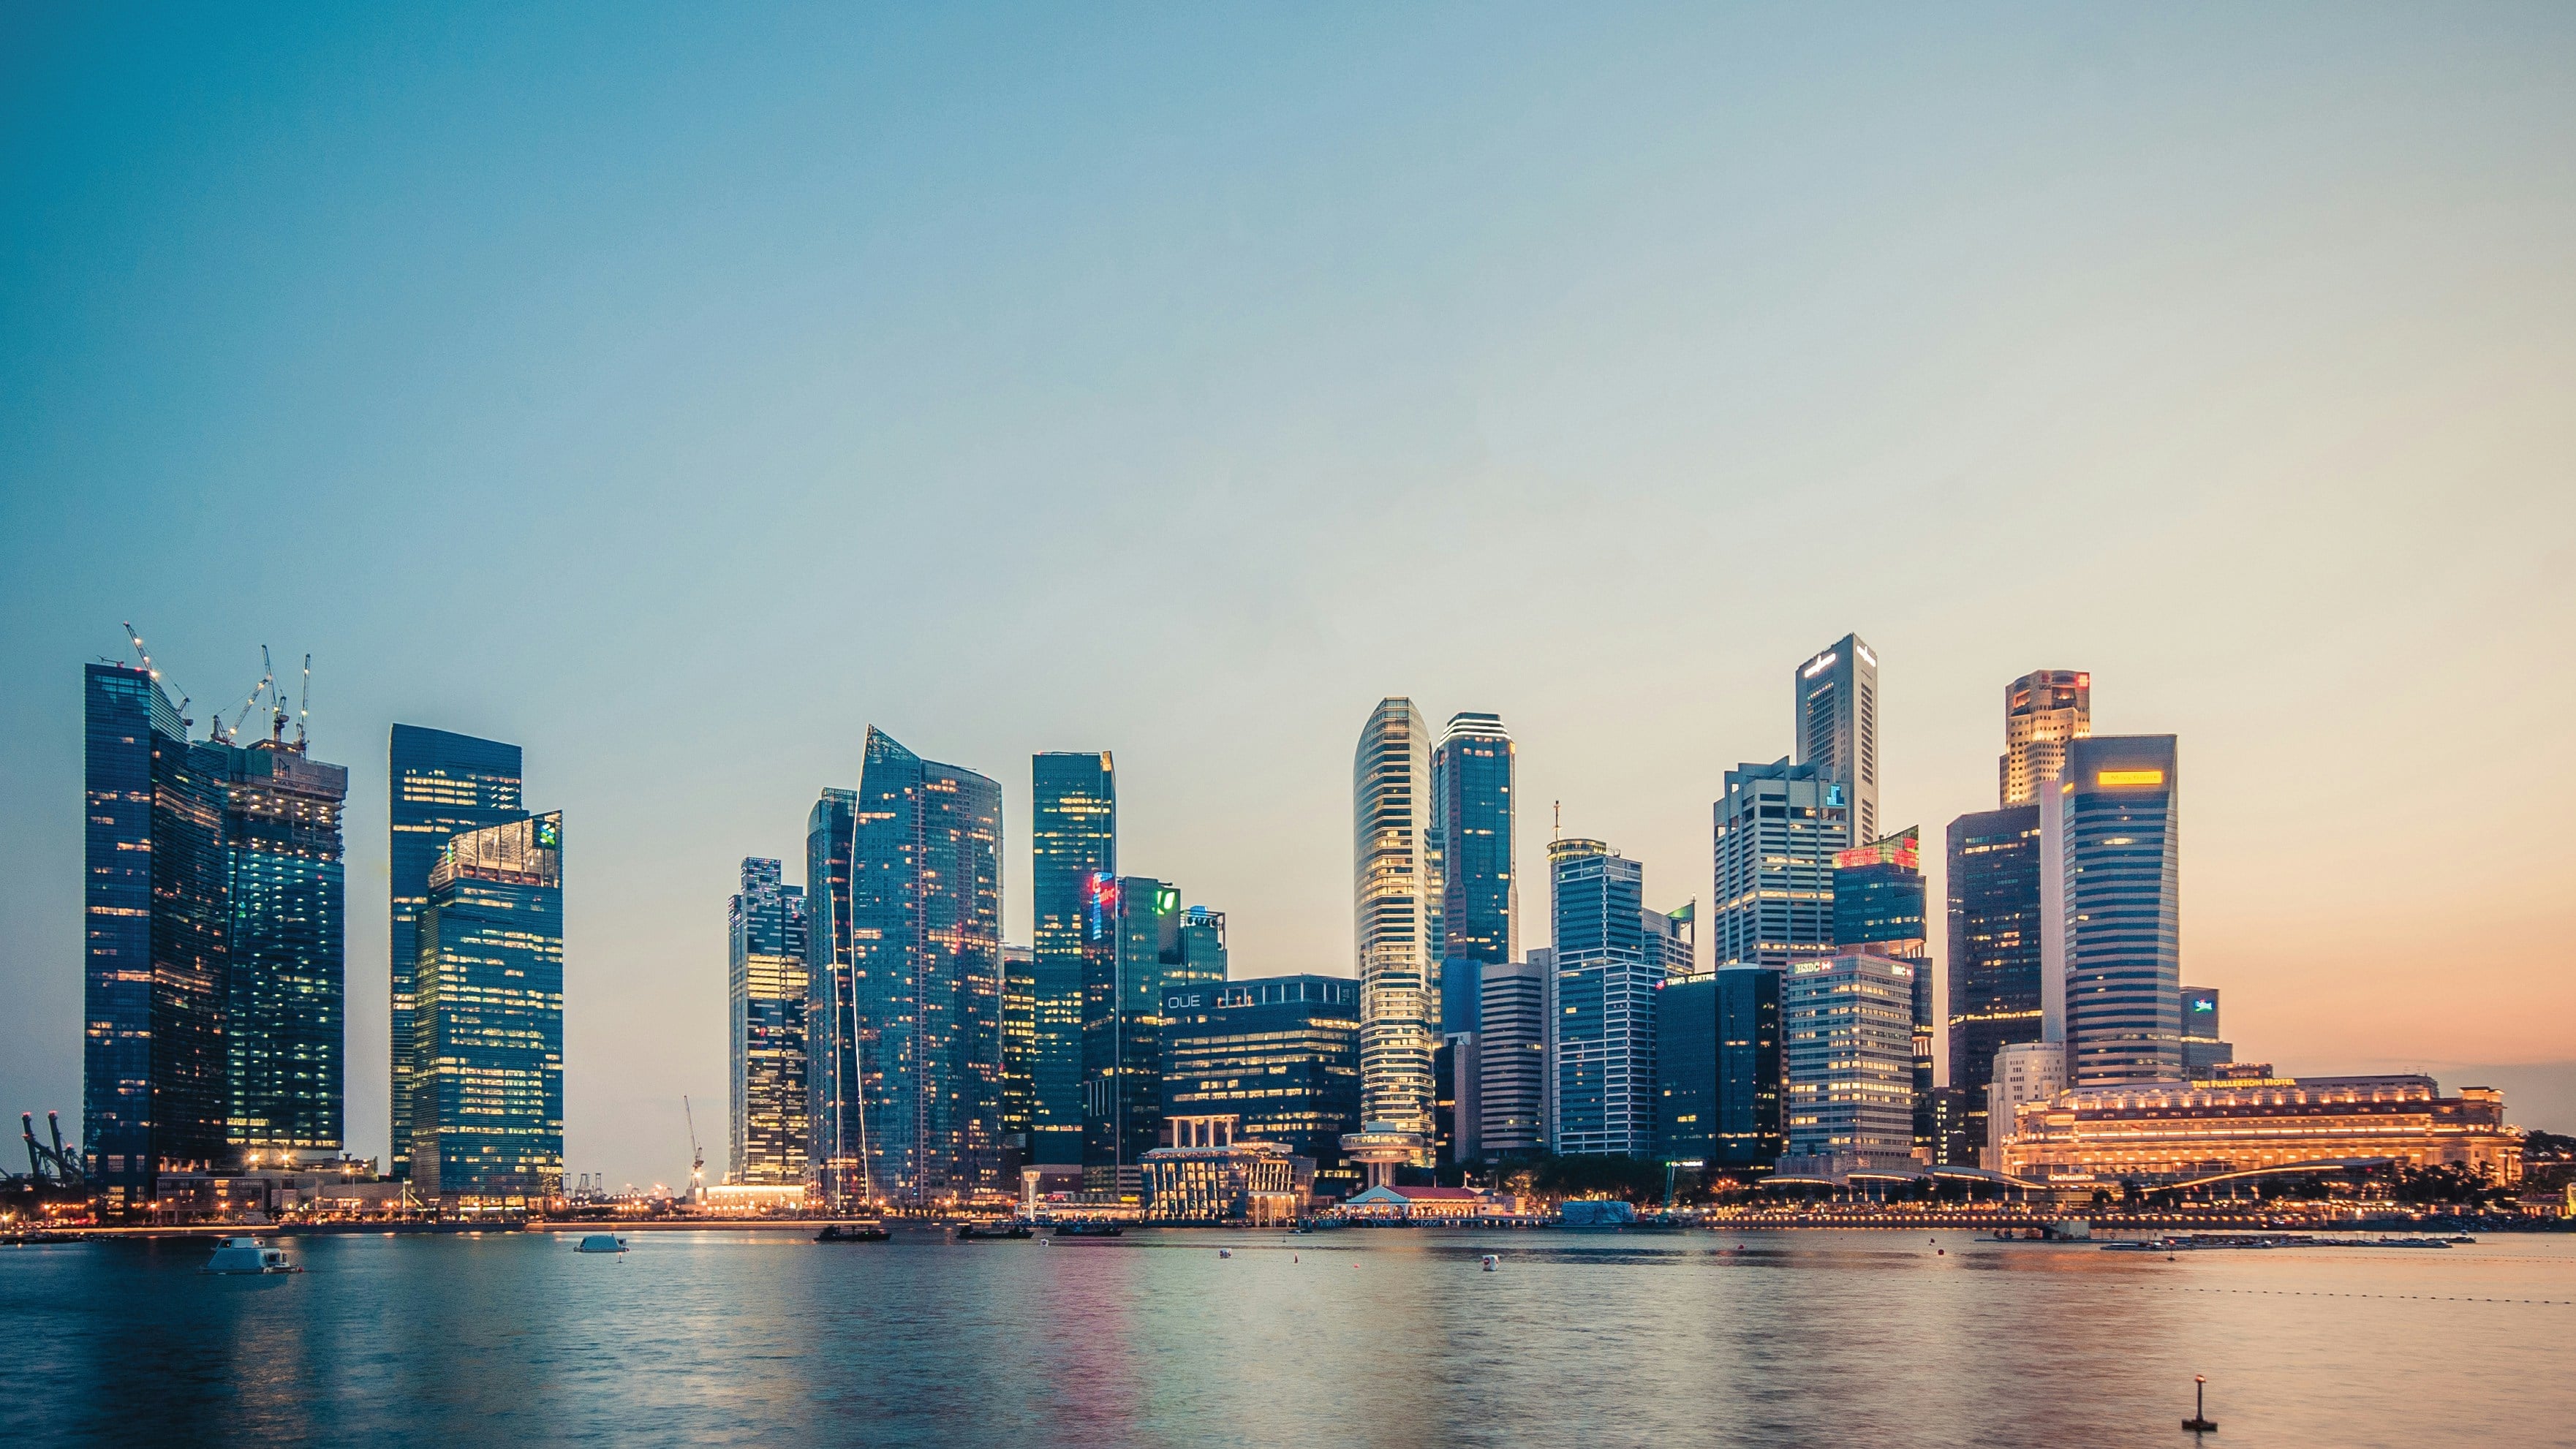 As a small country, soft power is particularly important for Singapore